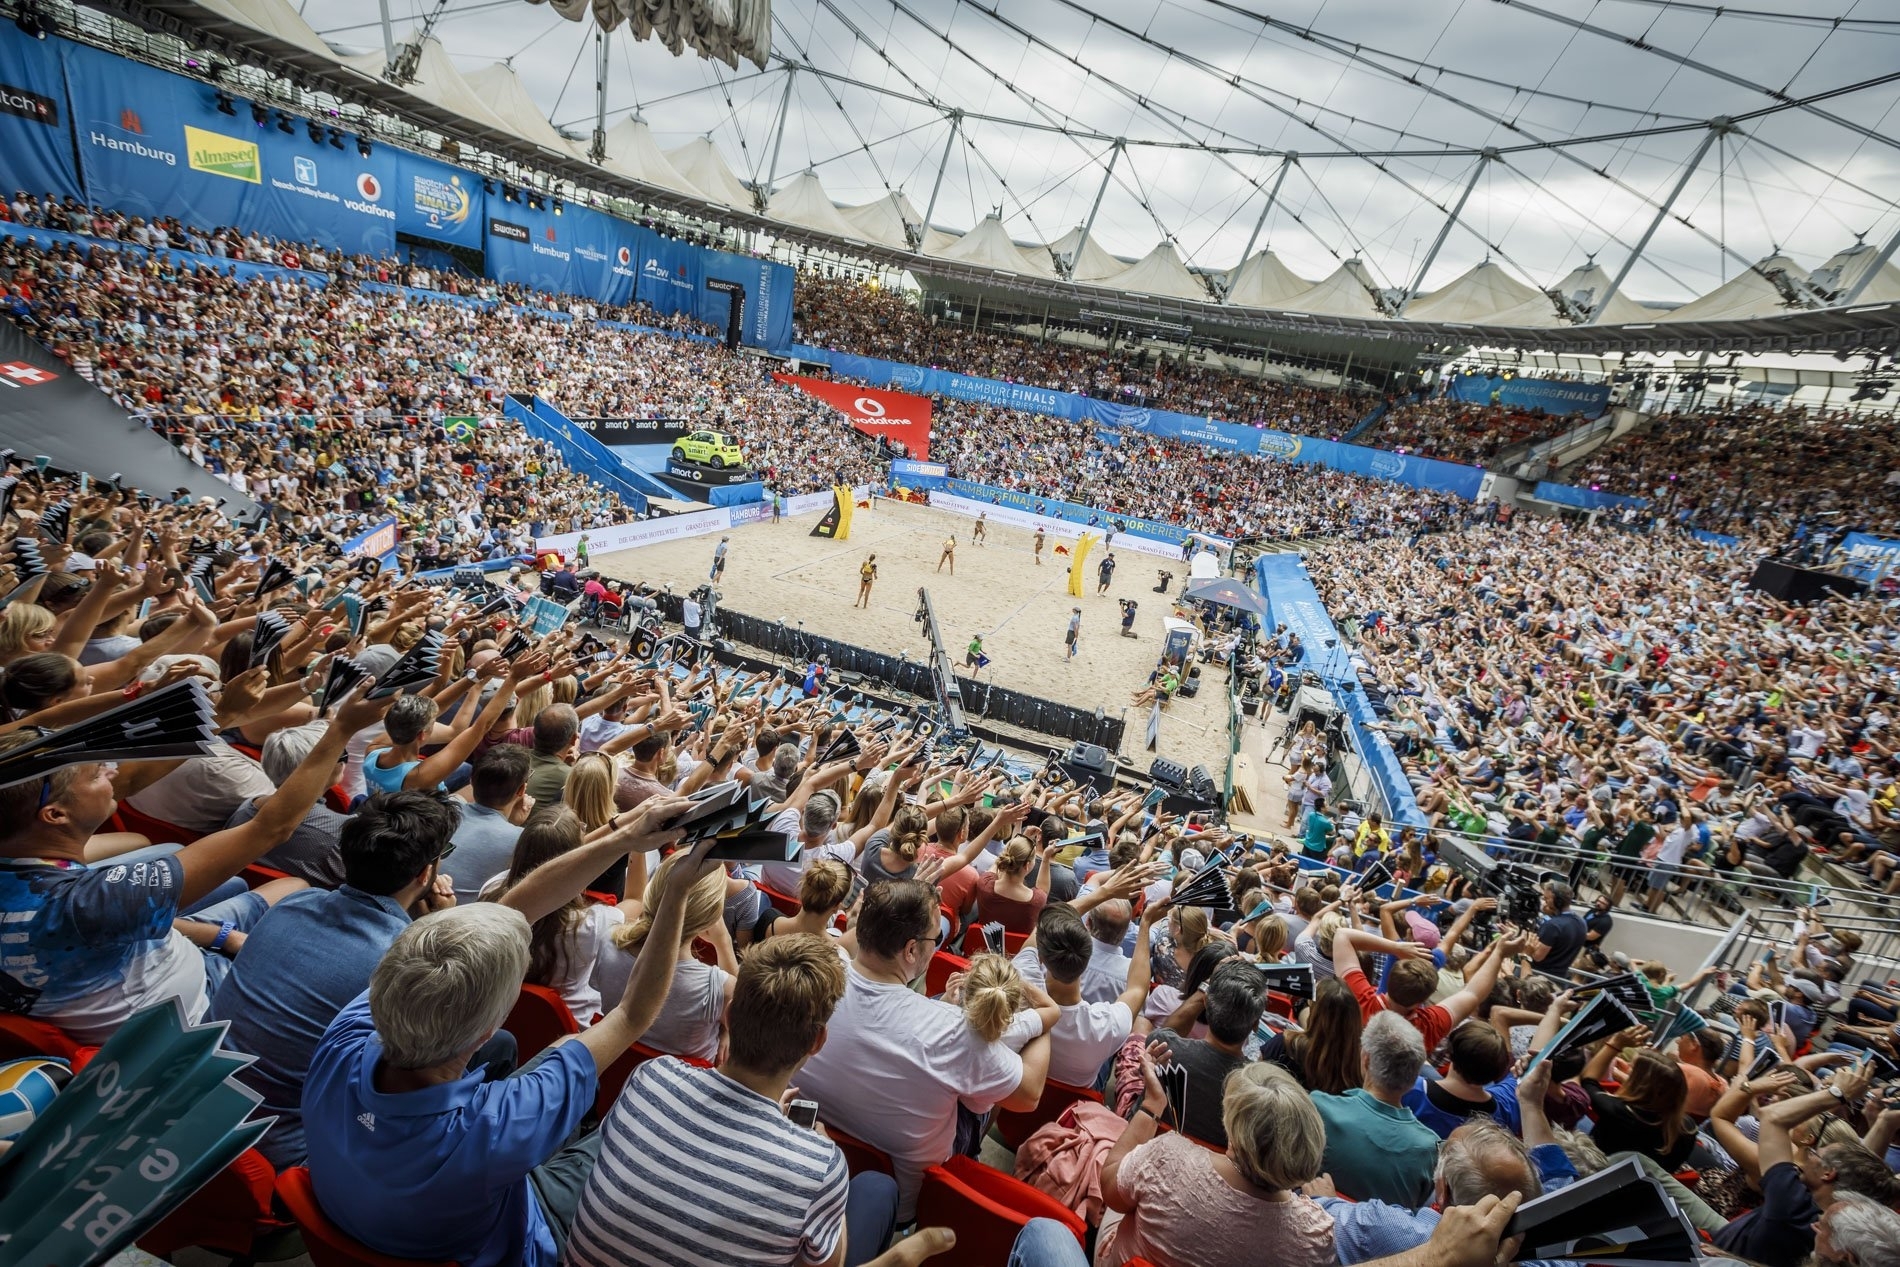 A packed Red Bull Beach Arena crowd cheered on their heroes to gold